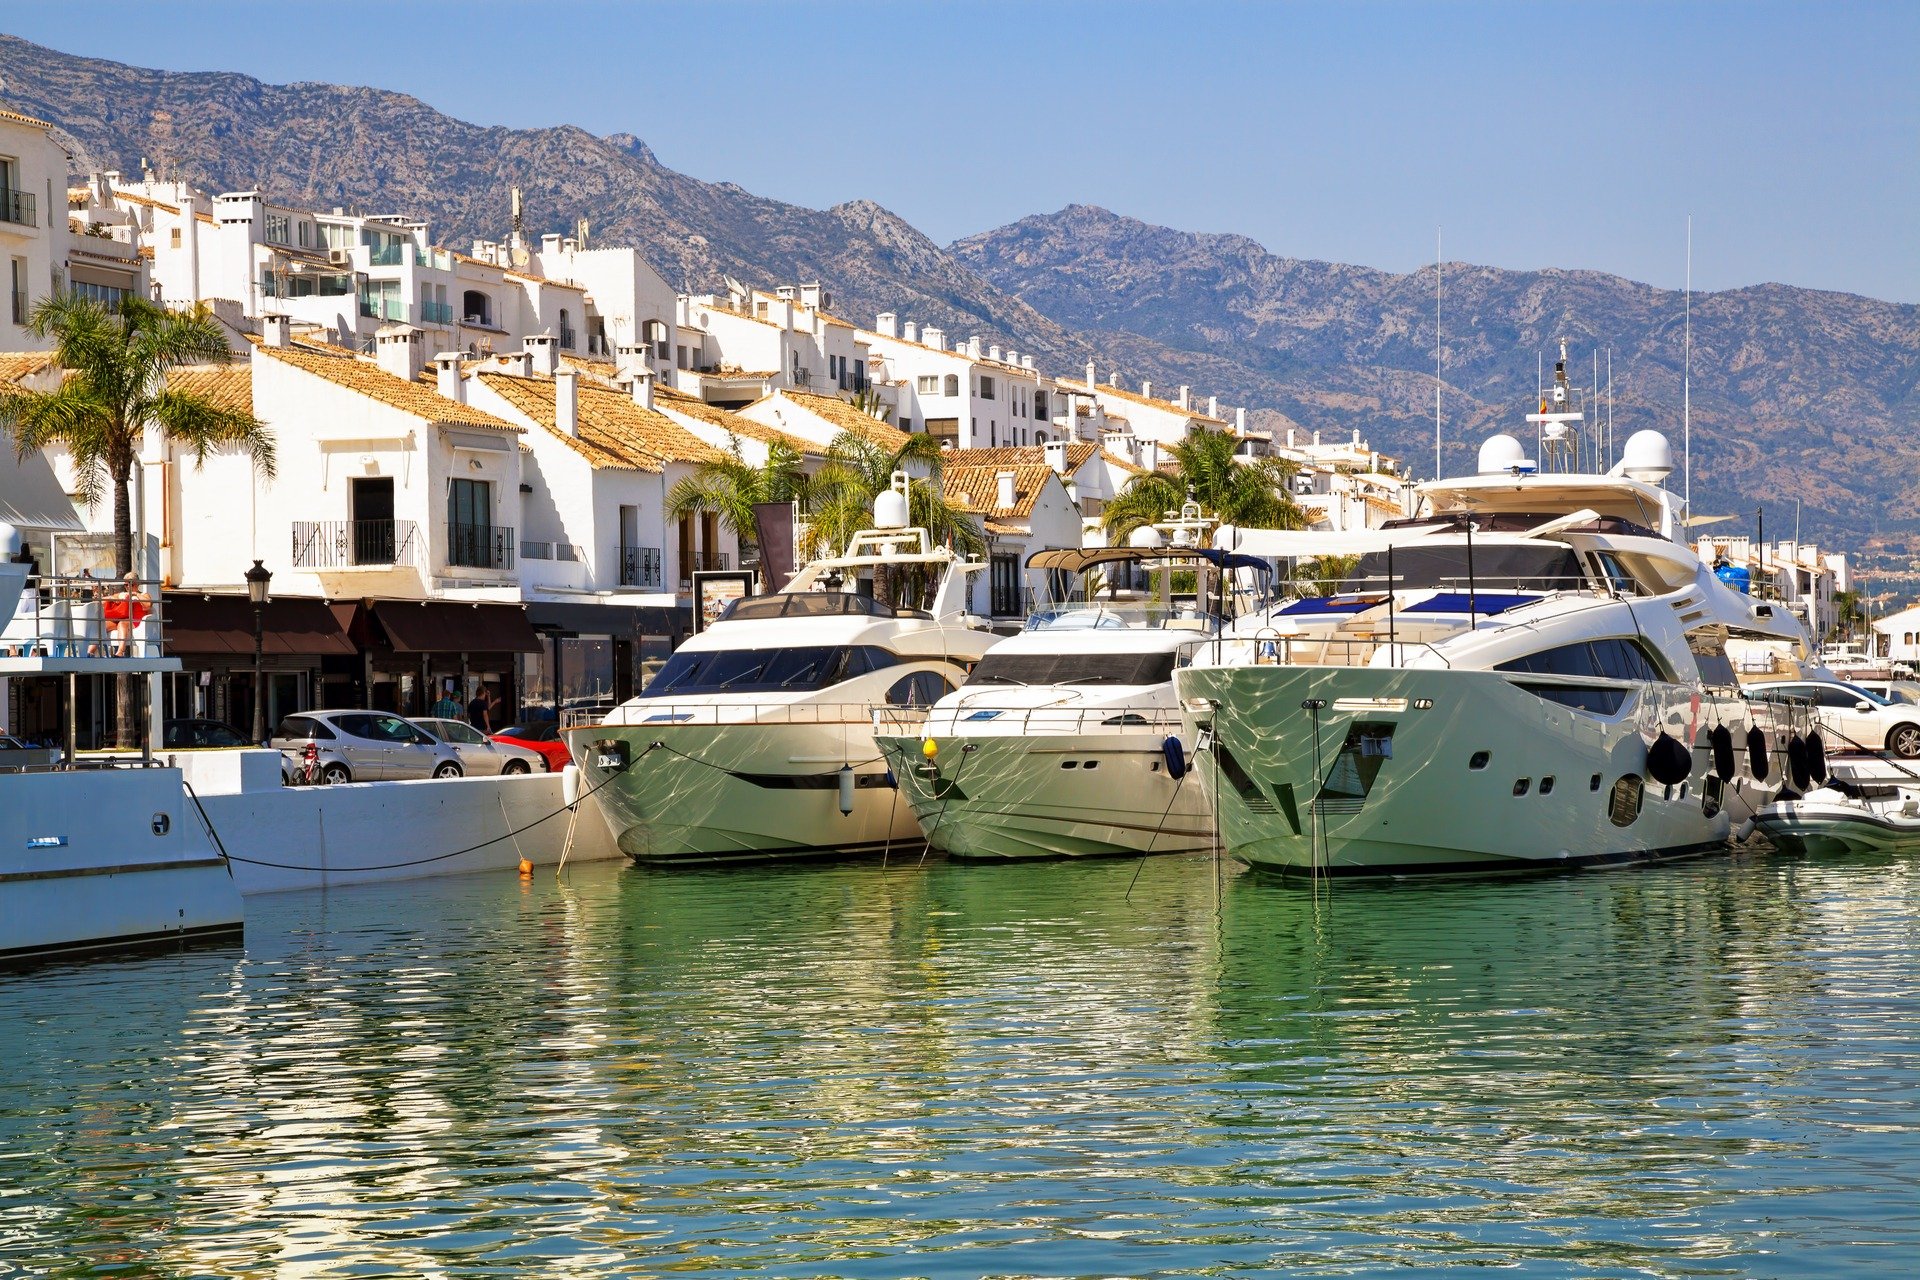 A Complete Guide of Puerto Banús - Things to do Around Sotogrande